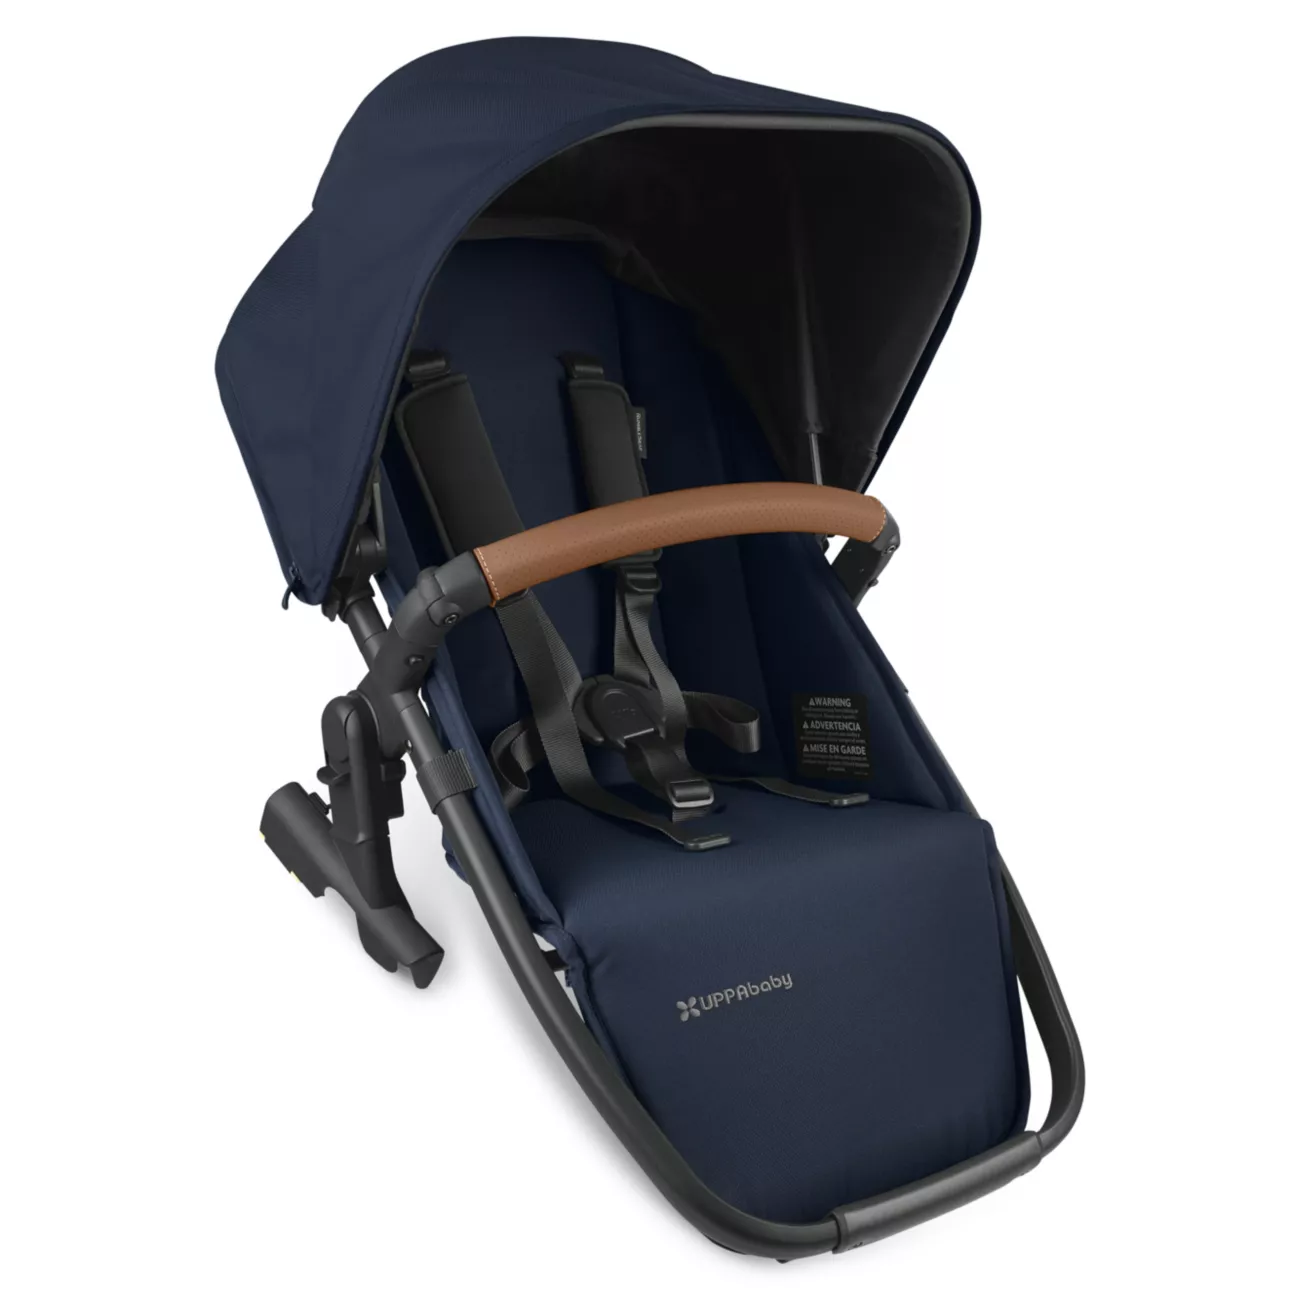 V2 Rumbleseat UPPAbaby